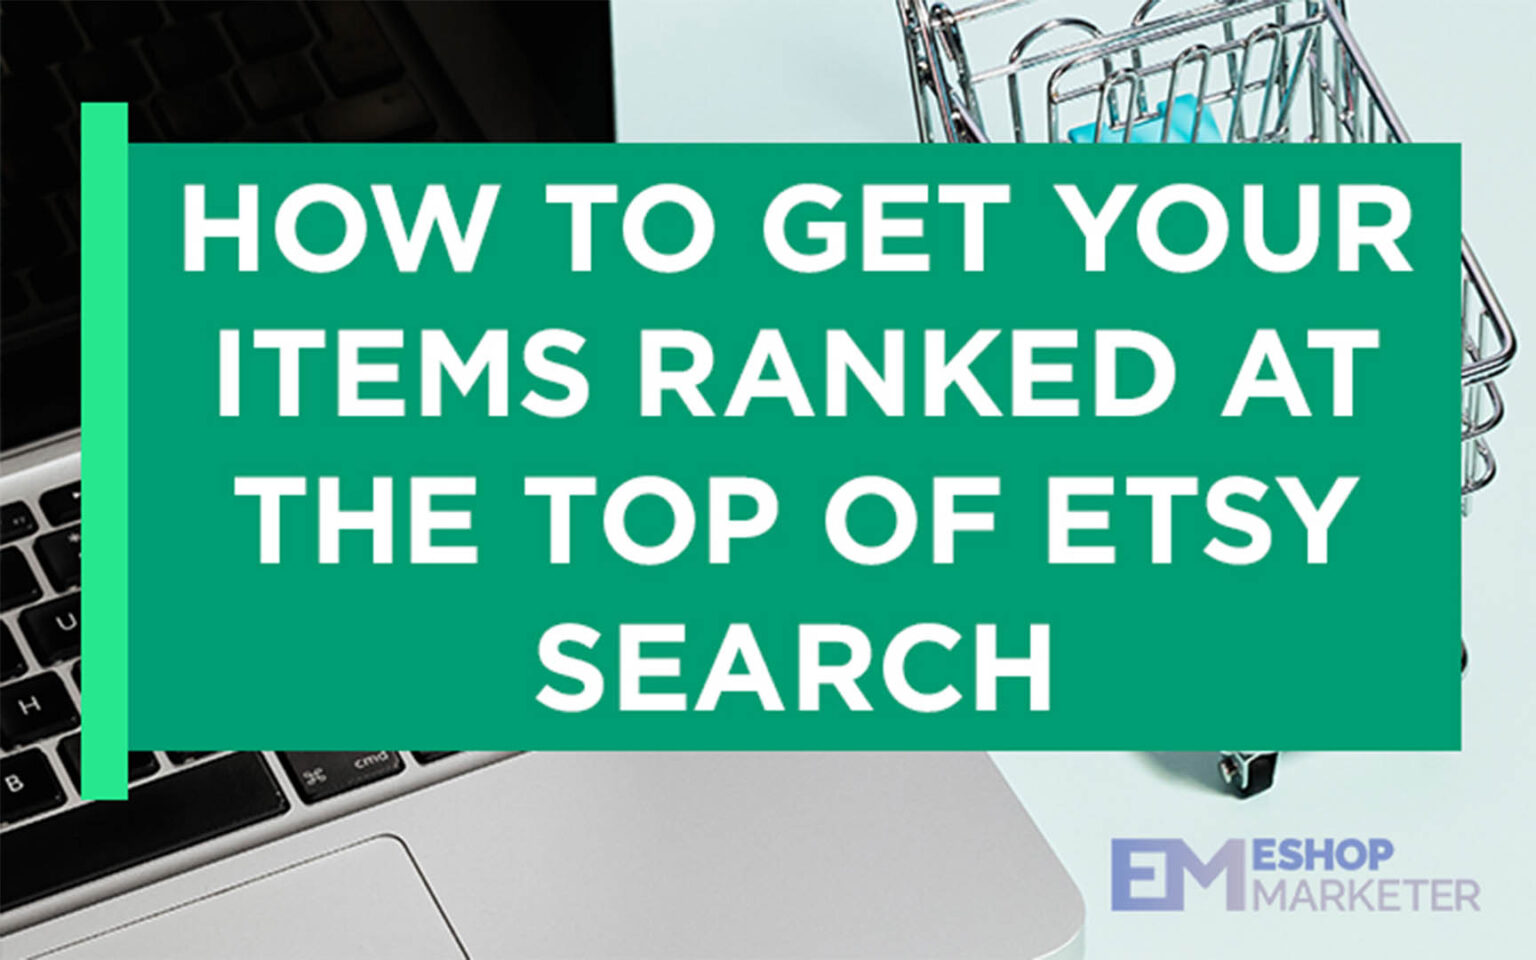 How To Get Your Items Ranked At The Top Of Etsy Search Results